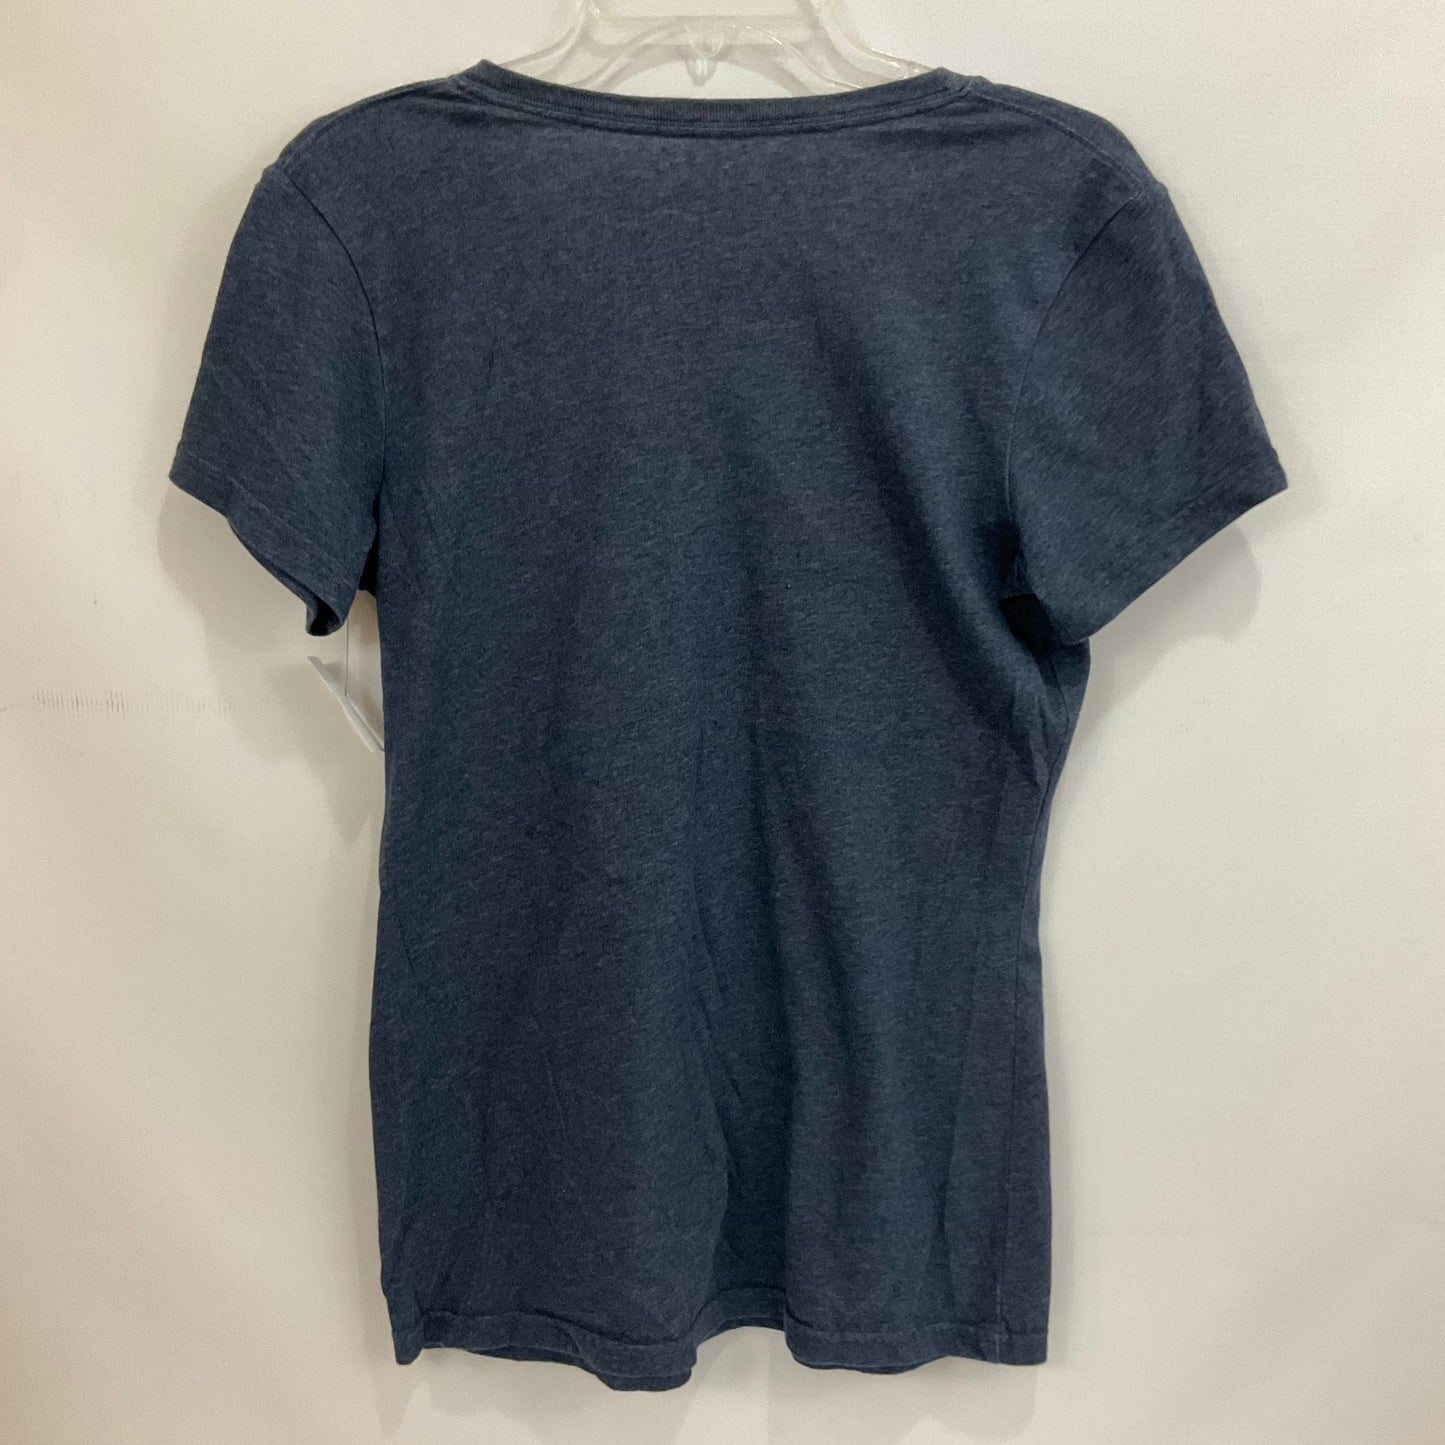 Navy Athletic Top Short Sleeve Nike Apparel, Size L